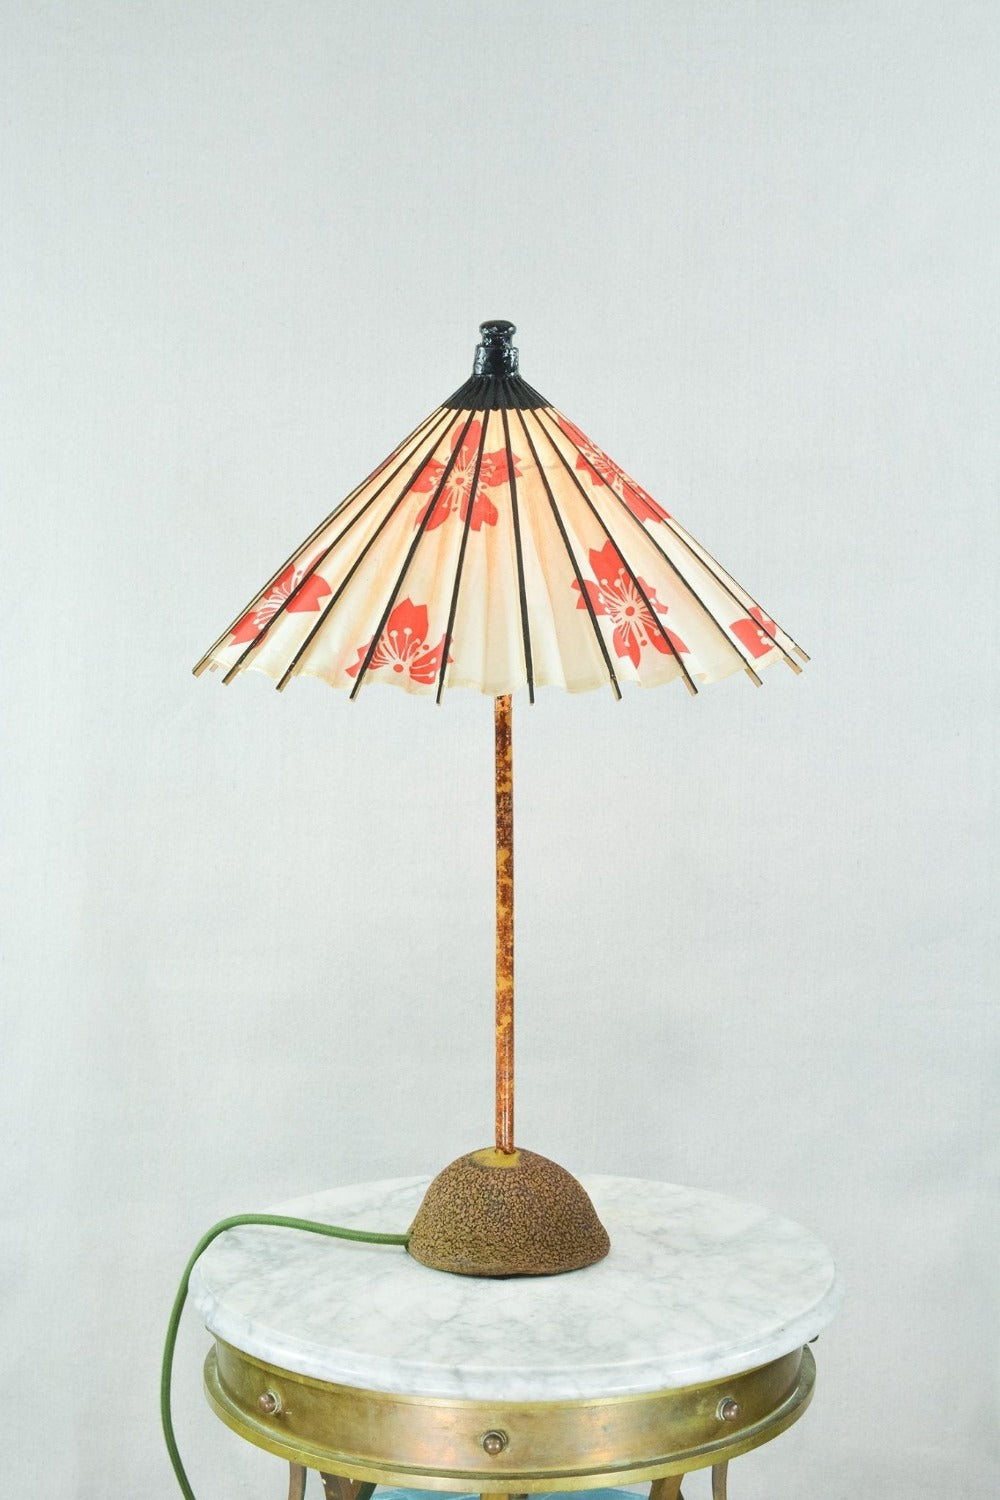 'Aloha Modern' Bamboo Table Lamp with Coconut Base and Japanese Hibiscus Parasol Shade — Model No. 018 - Tennant New York